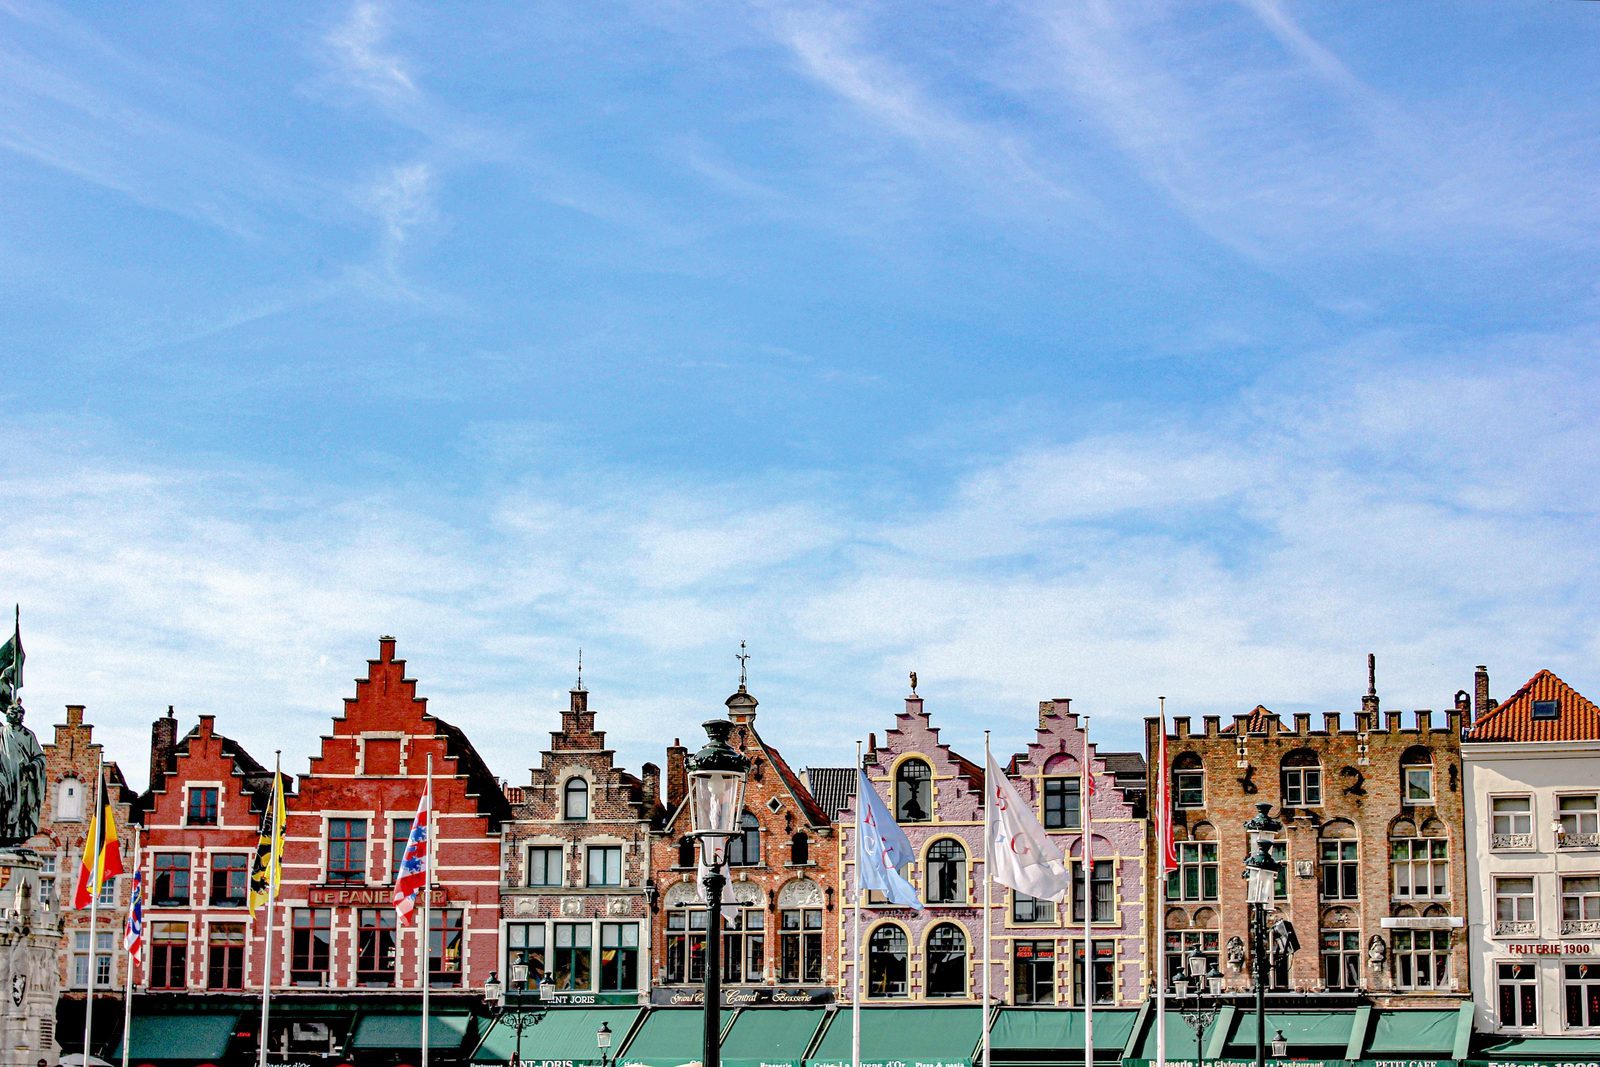 Discover the Hinterland of Bruges